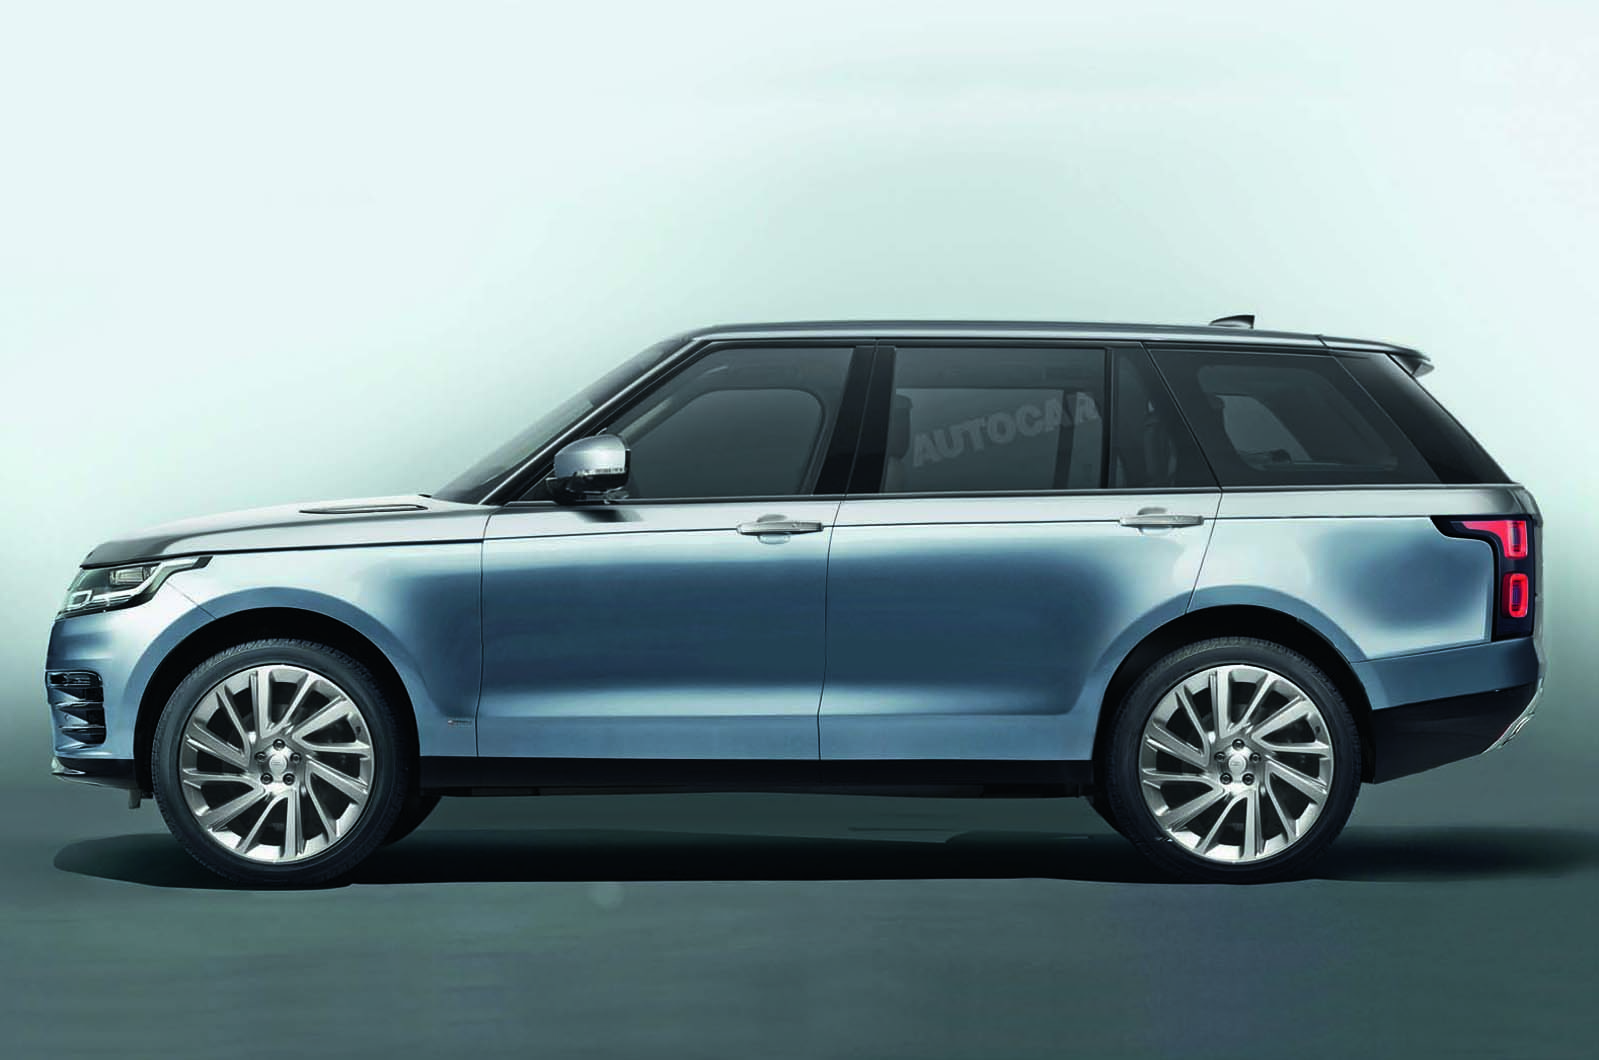 New 2021 Range Rover spotted with BMW V8 engine